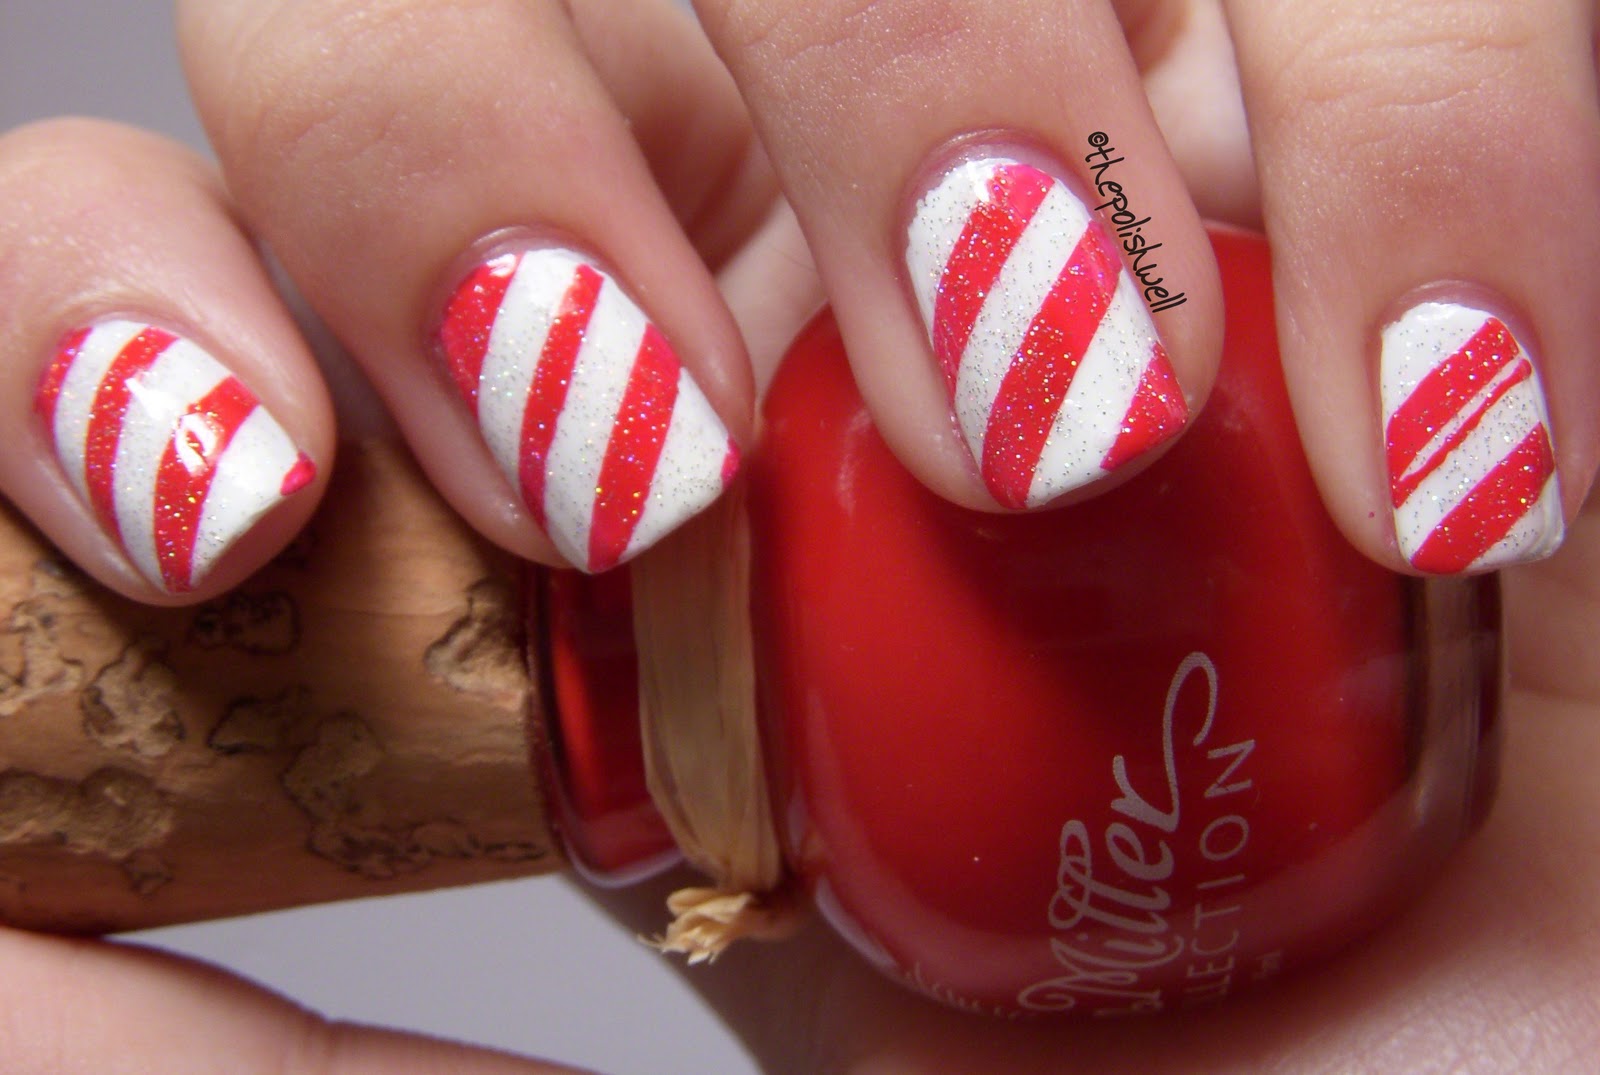 4. Christmas Candy Cane Nail Art on Pinterest - wide 7